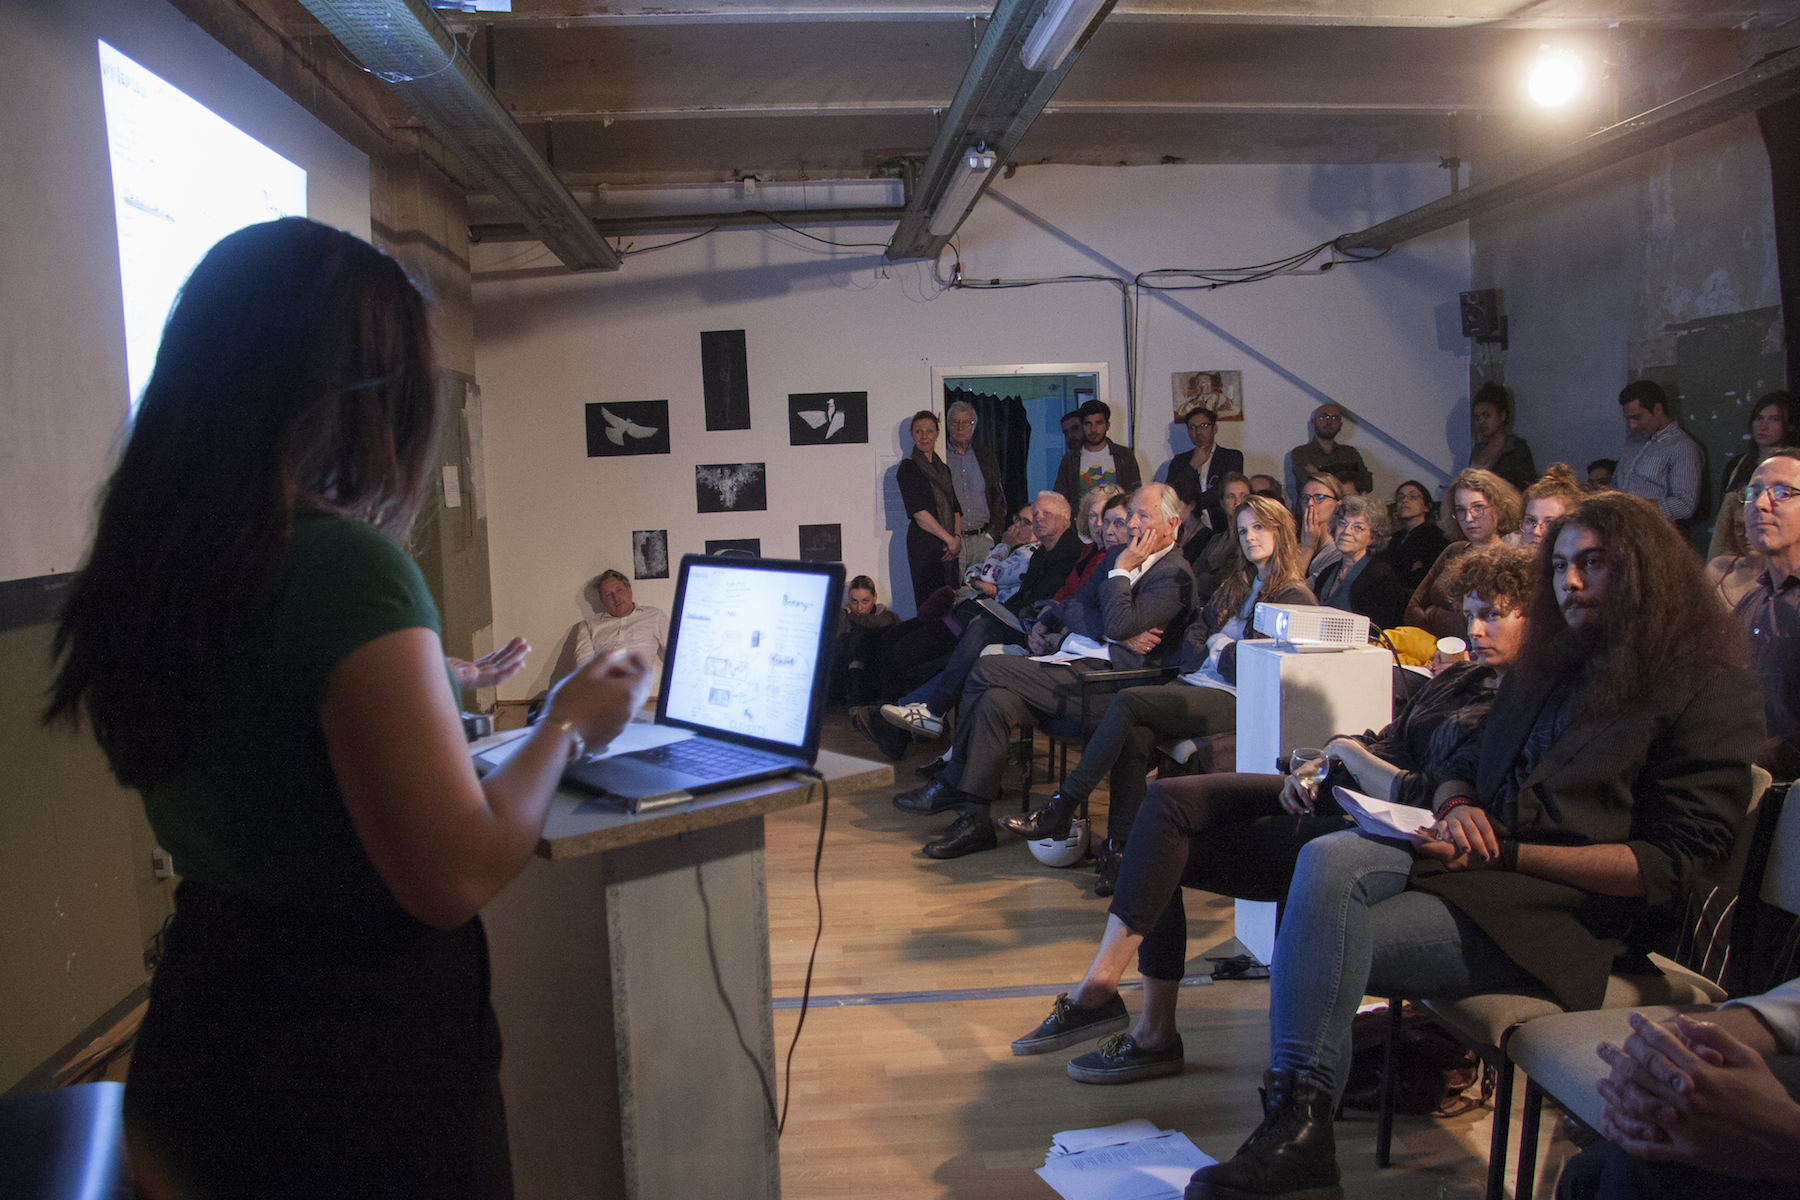 Maria Jose Sarmiento speaking about her work during the "I Am The Ghost" event this past Spring 2018 (Photo by Irina Stelea)